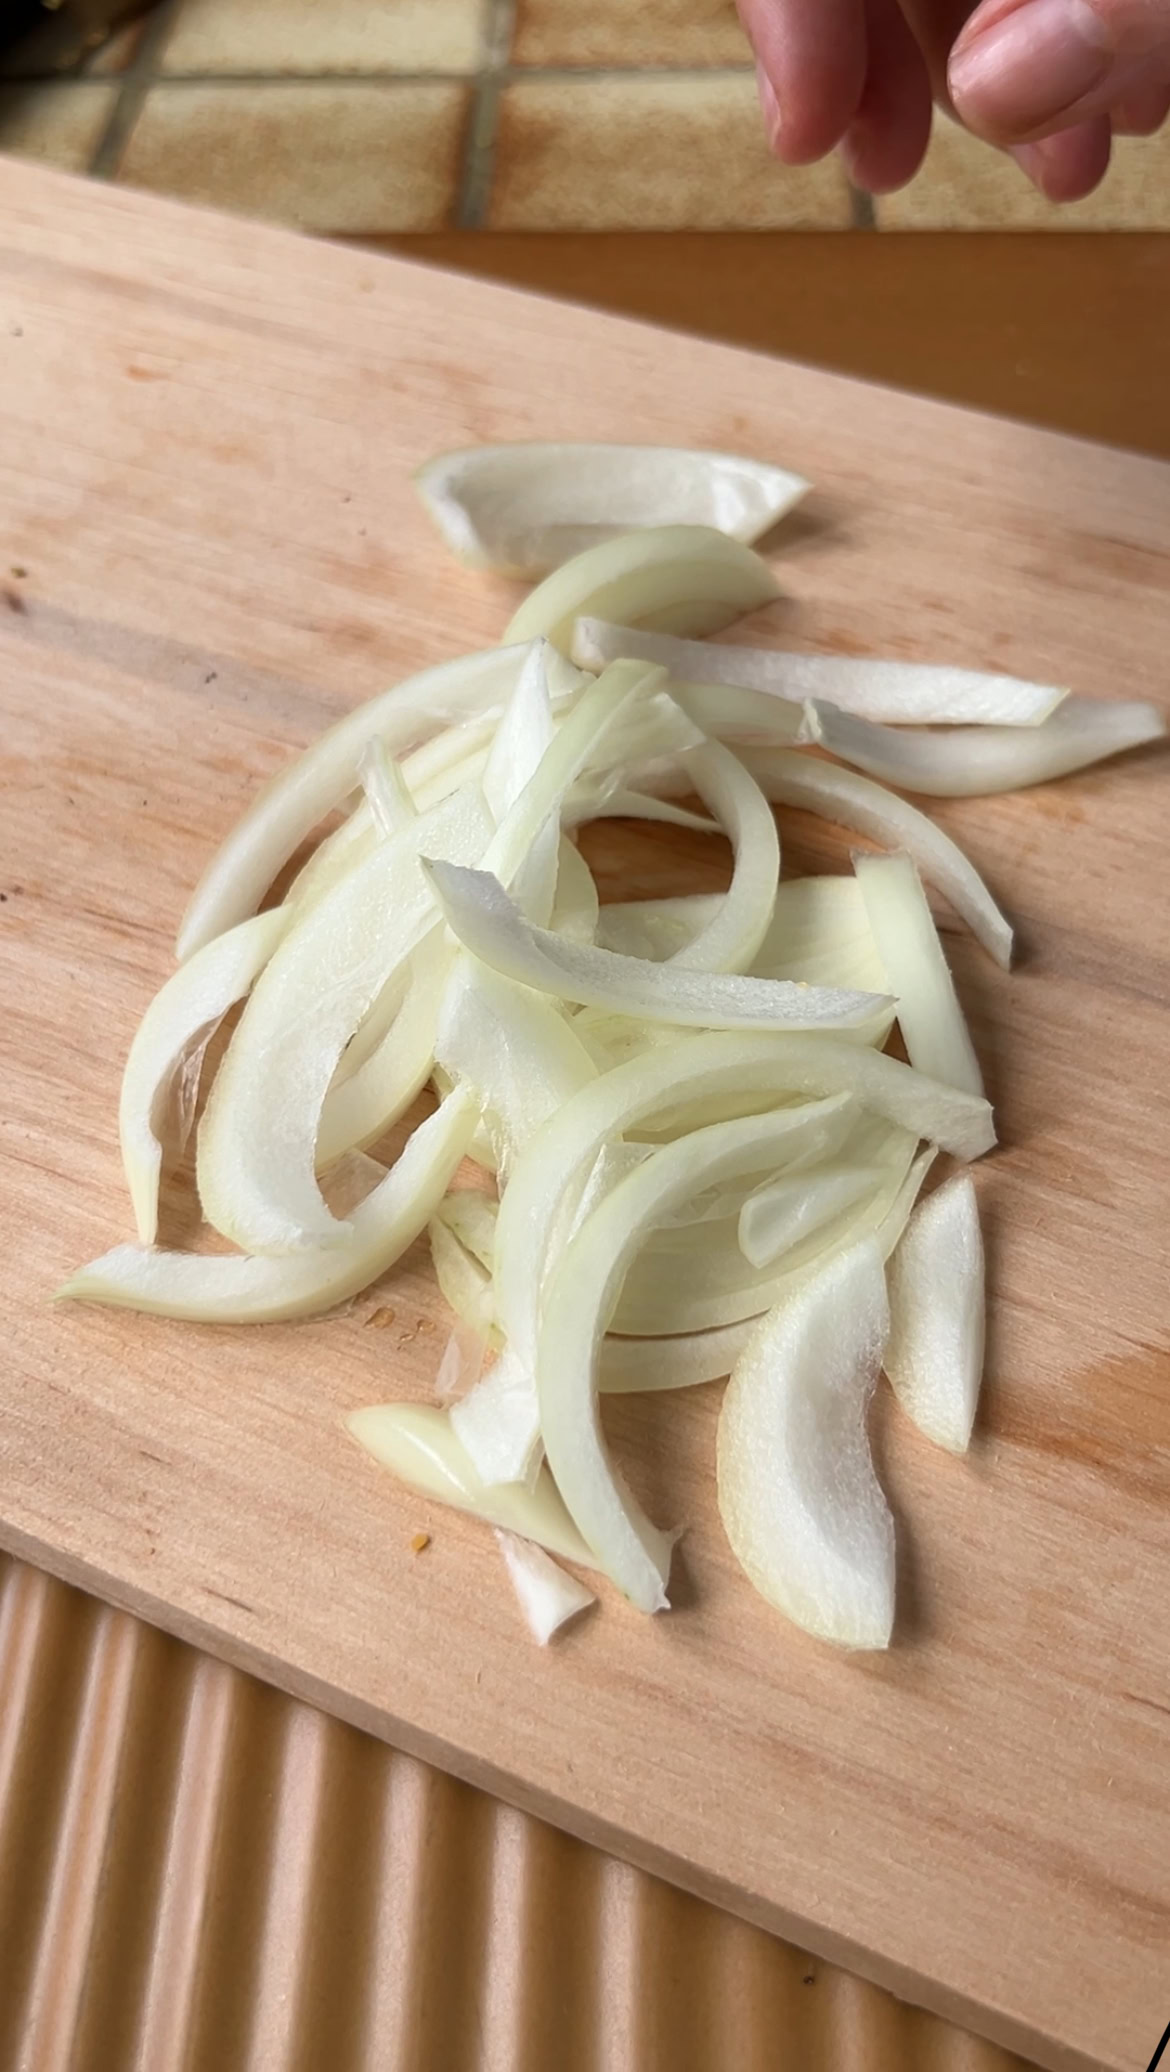 Onion slices on a wooden board.